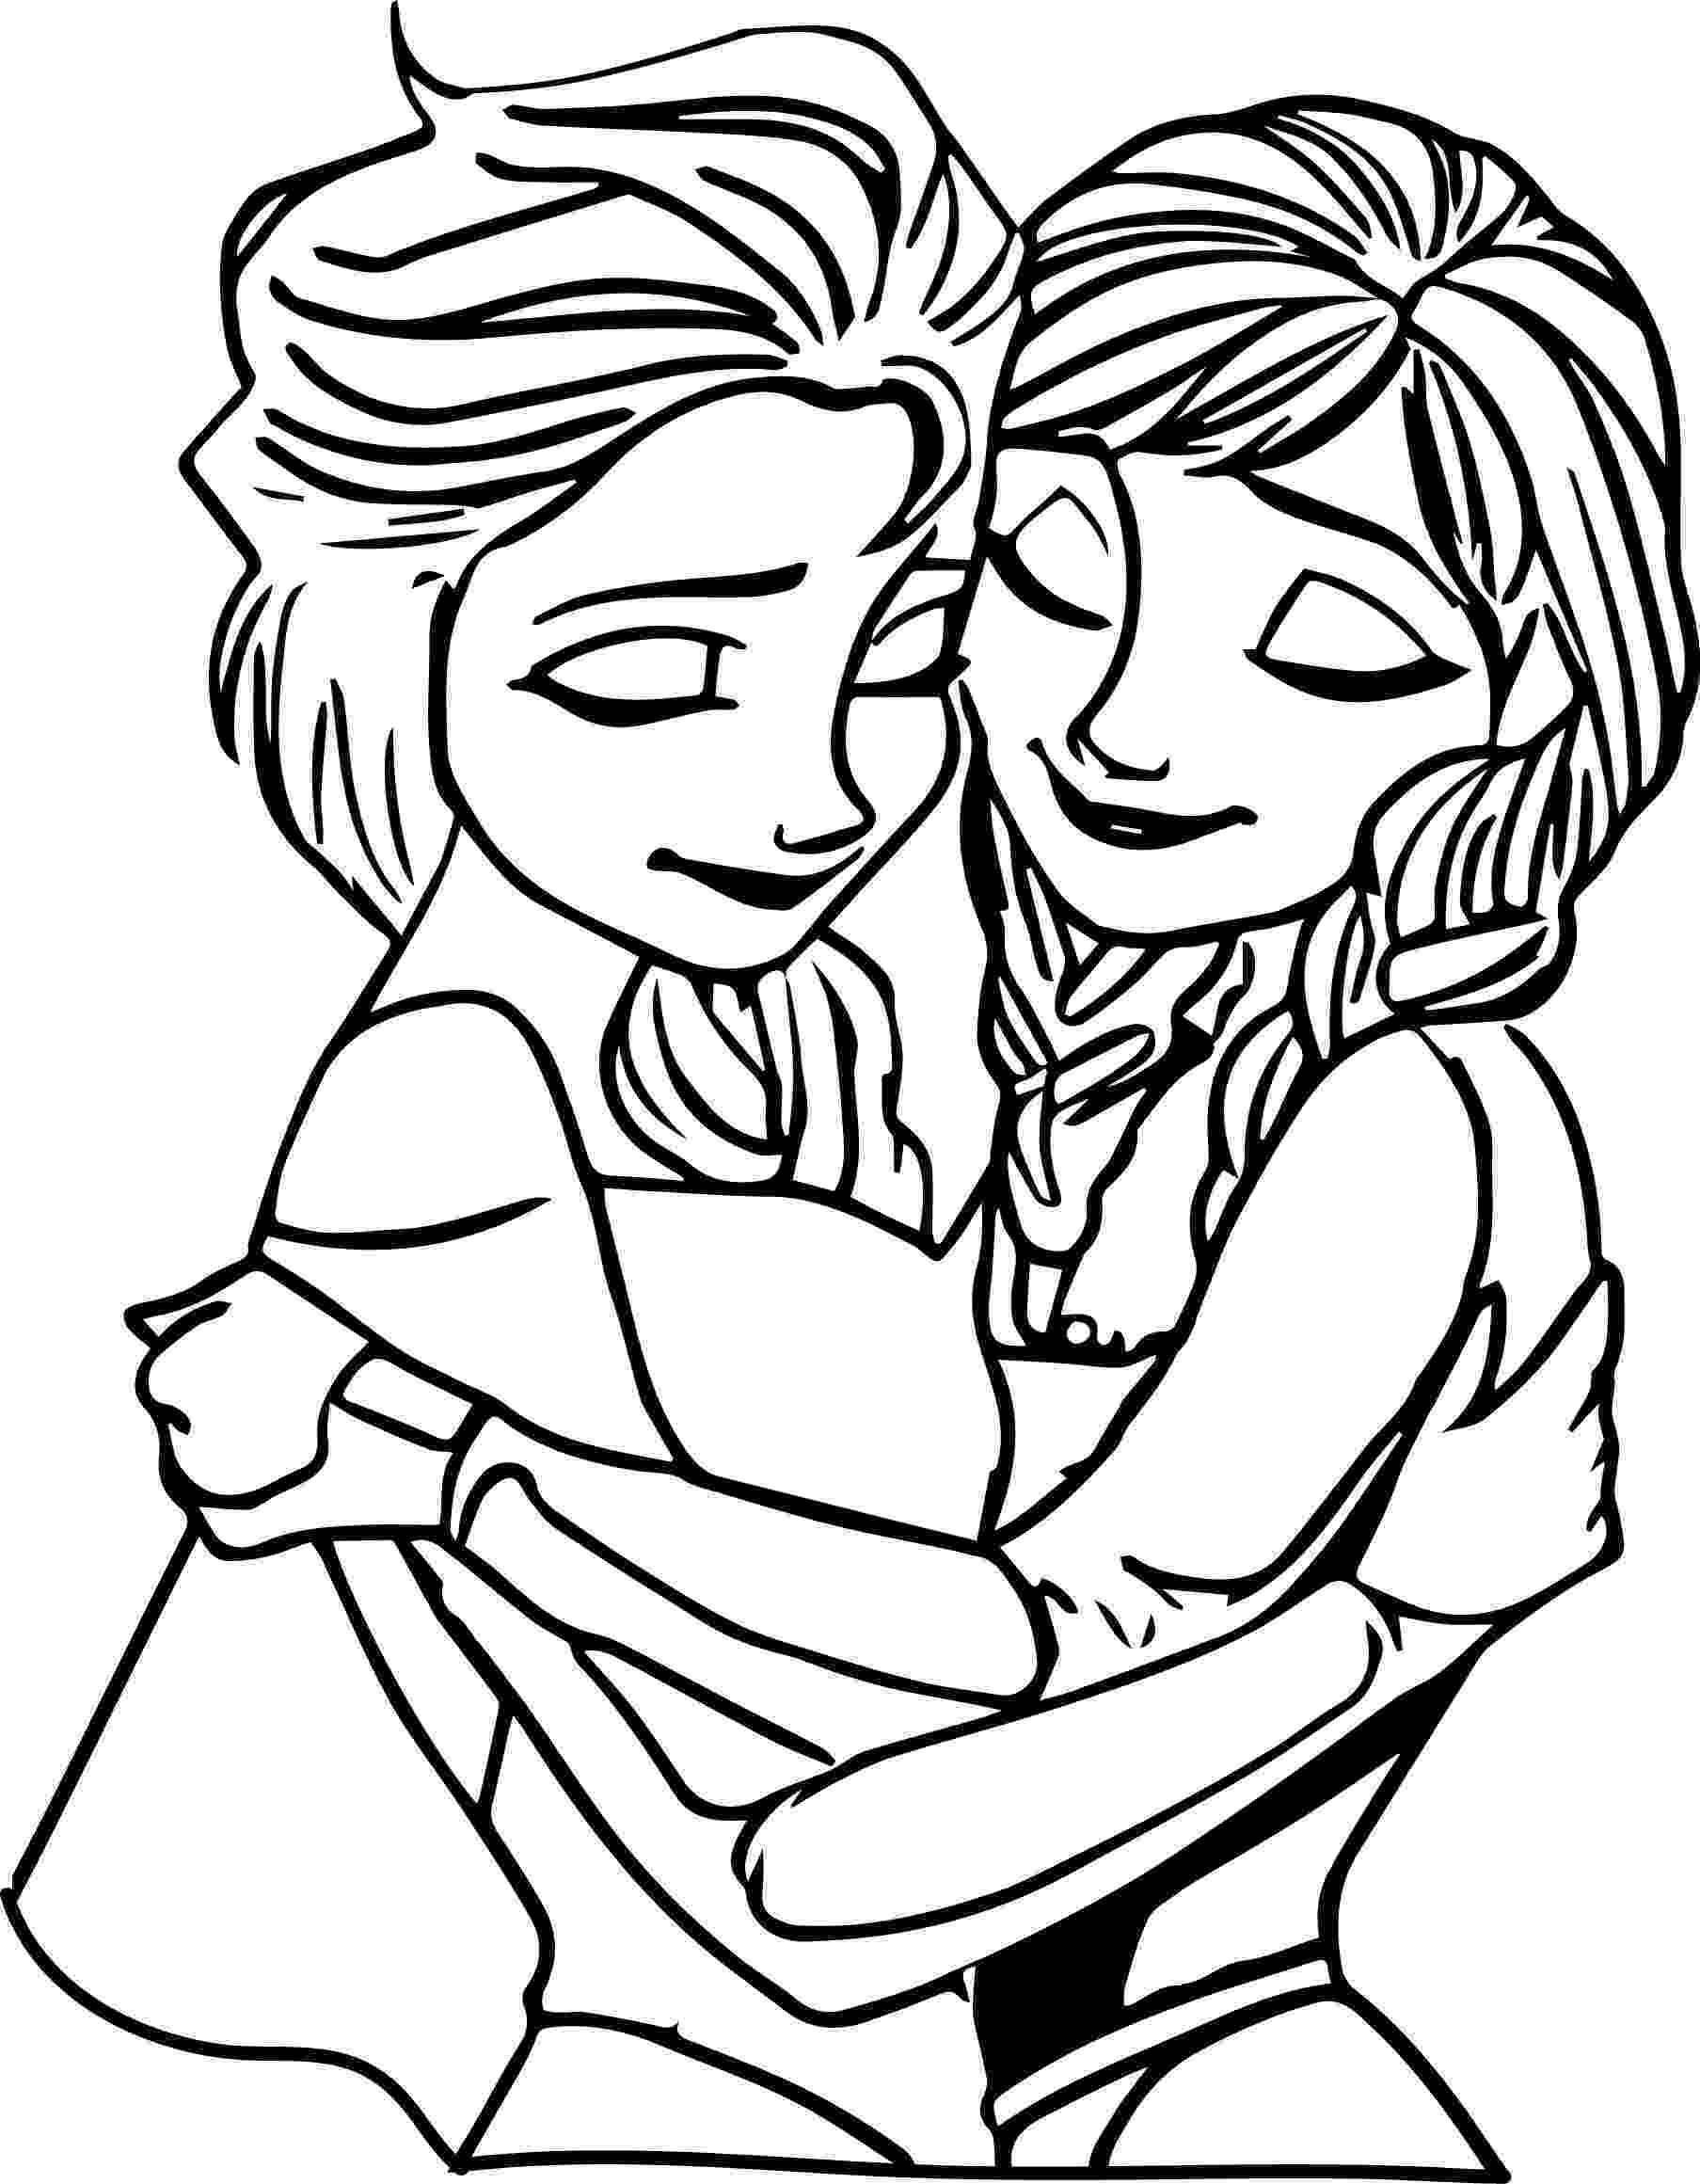 anna and elsa pictures to color elsa coloring pages free download best elsa coloring to pictures color elsa anna and 